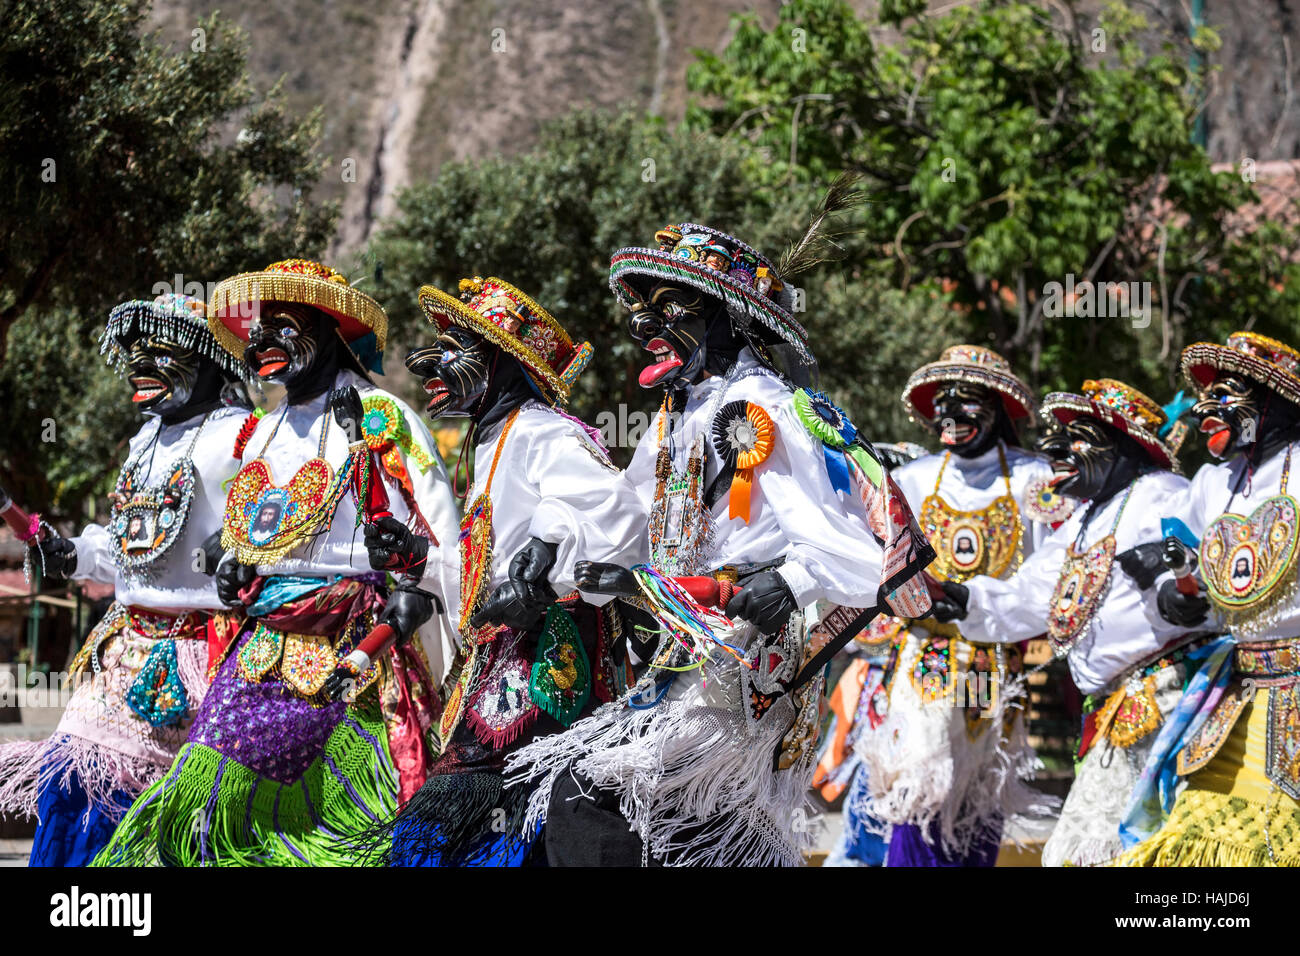 Men wearing colorful costumes during religious procession, Ollantaytambo, Cusco, Peru Stock Photo